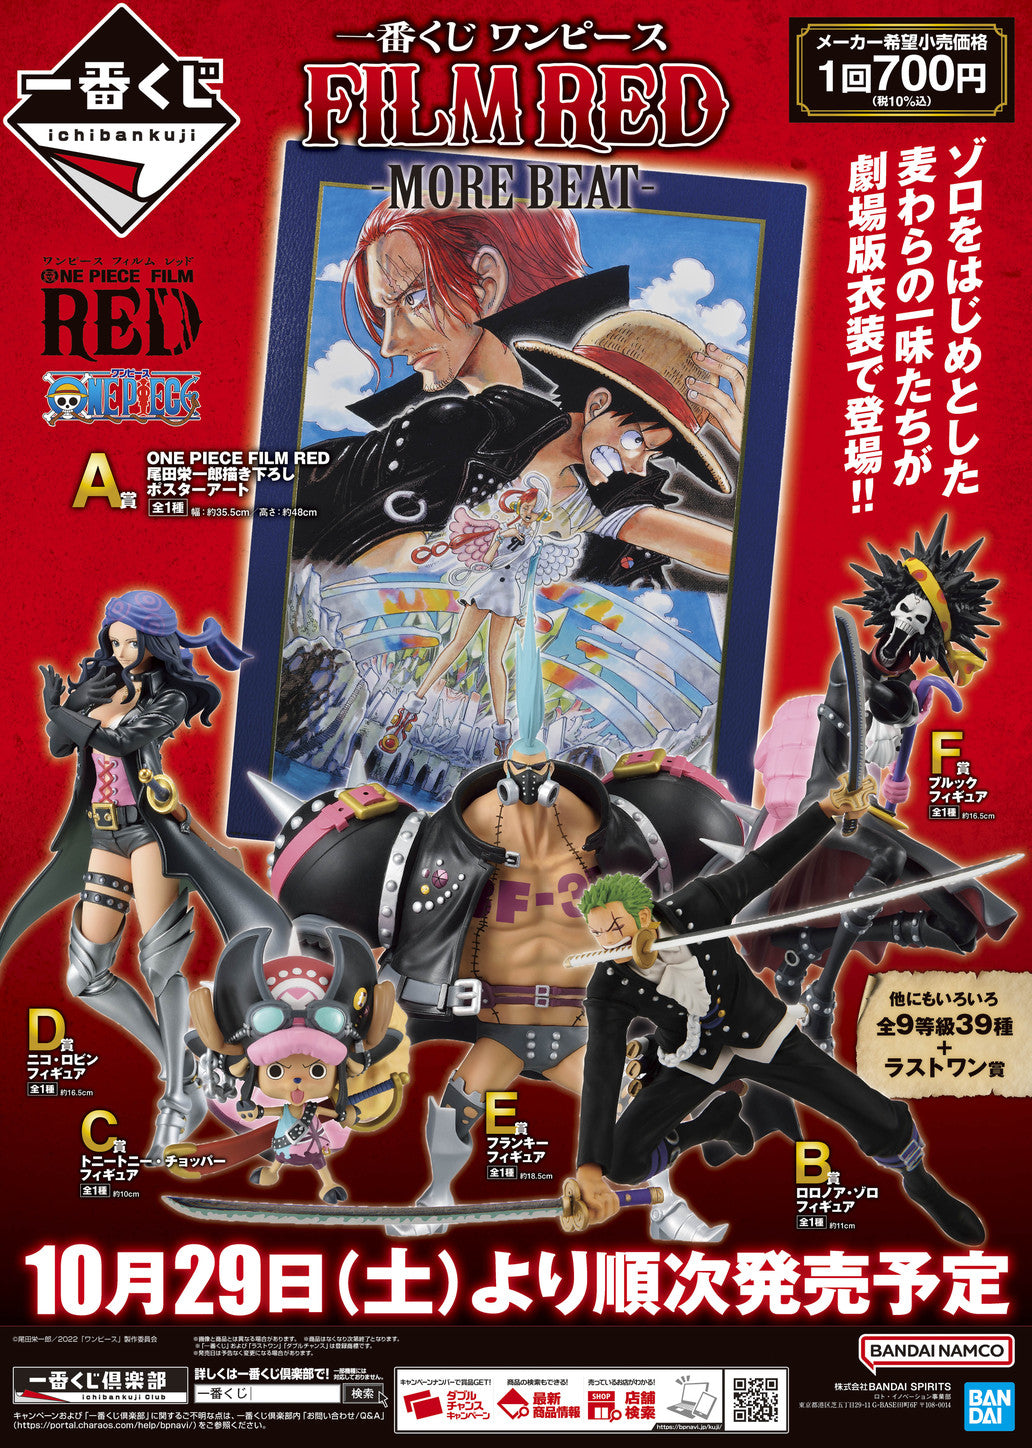 East Vic Park - Ichiban Kuji: One Piece Film Red -More Beat-